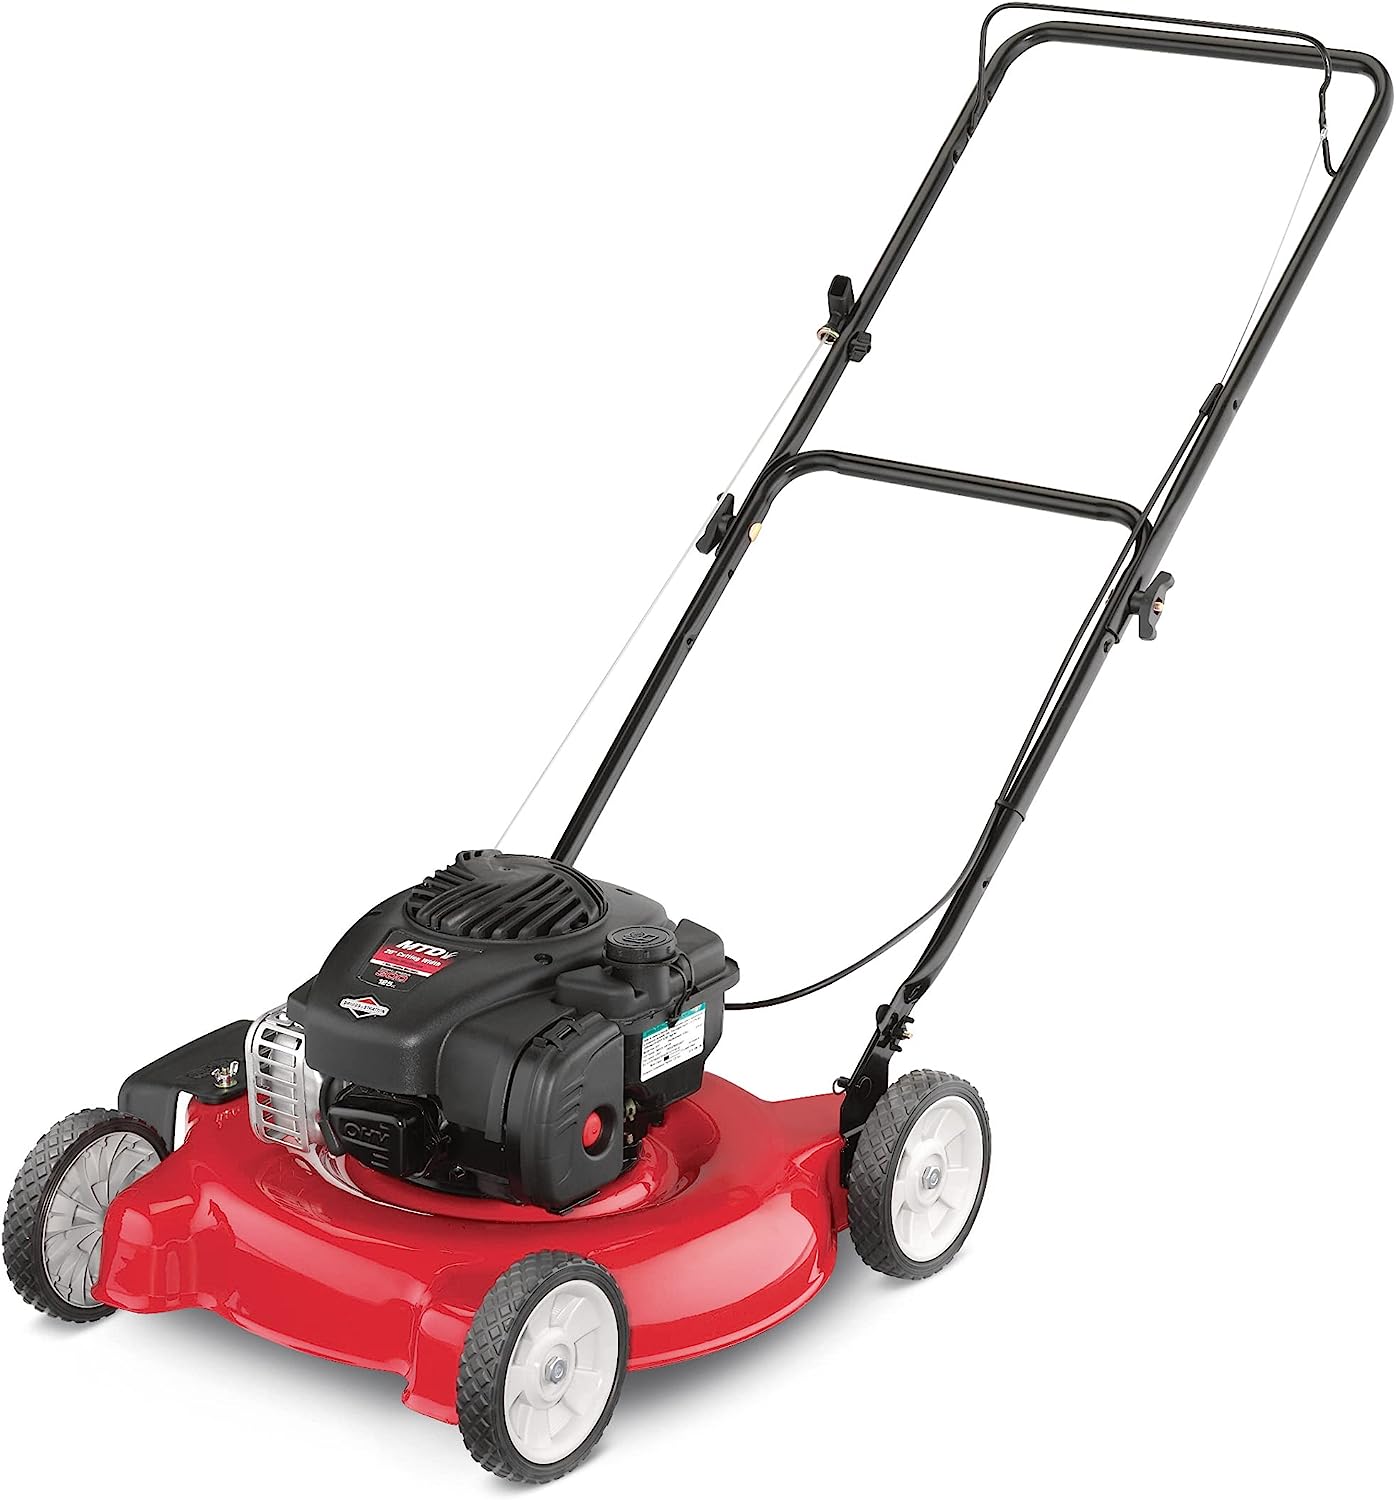 Yard Machines 11A-02BT729 20-in Push Lawn Mower with [...]